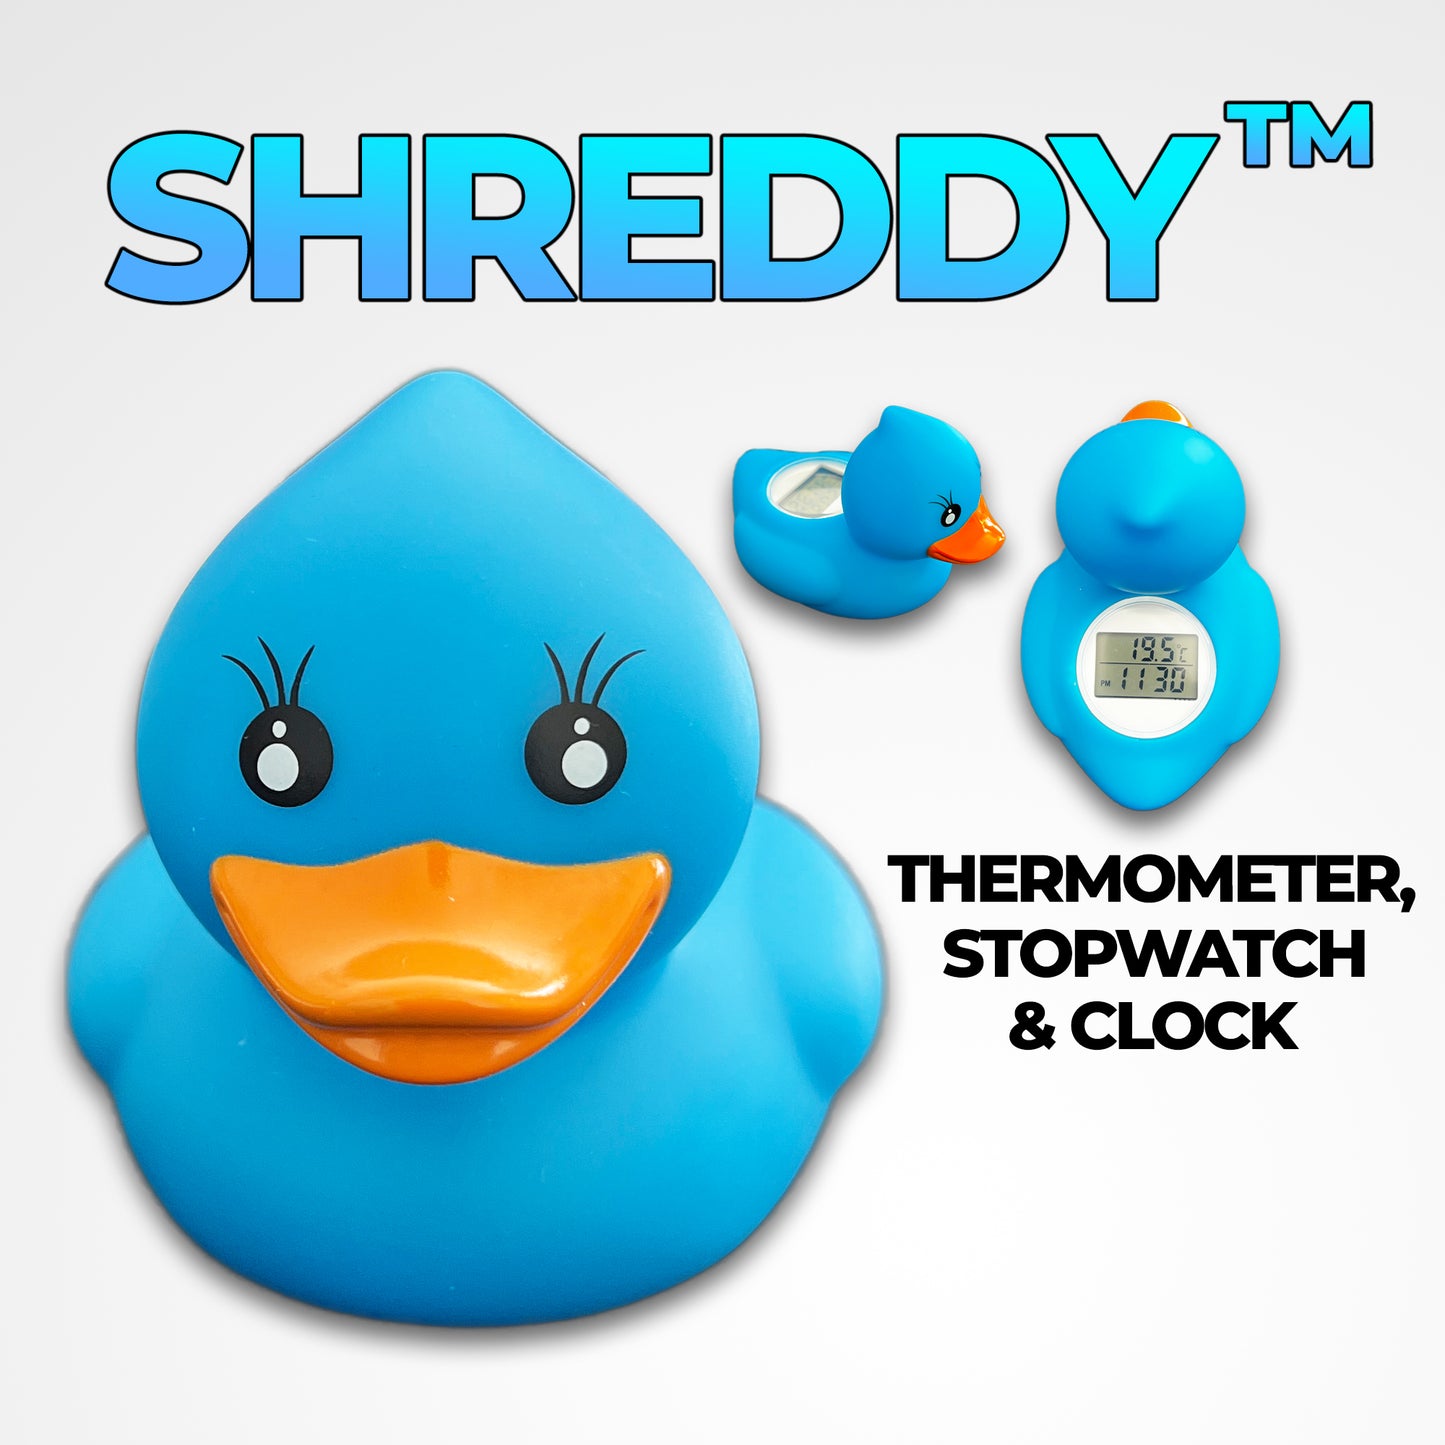 SHREDDY™ The Cold Plunge Duck